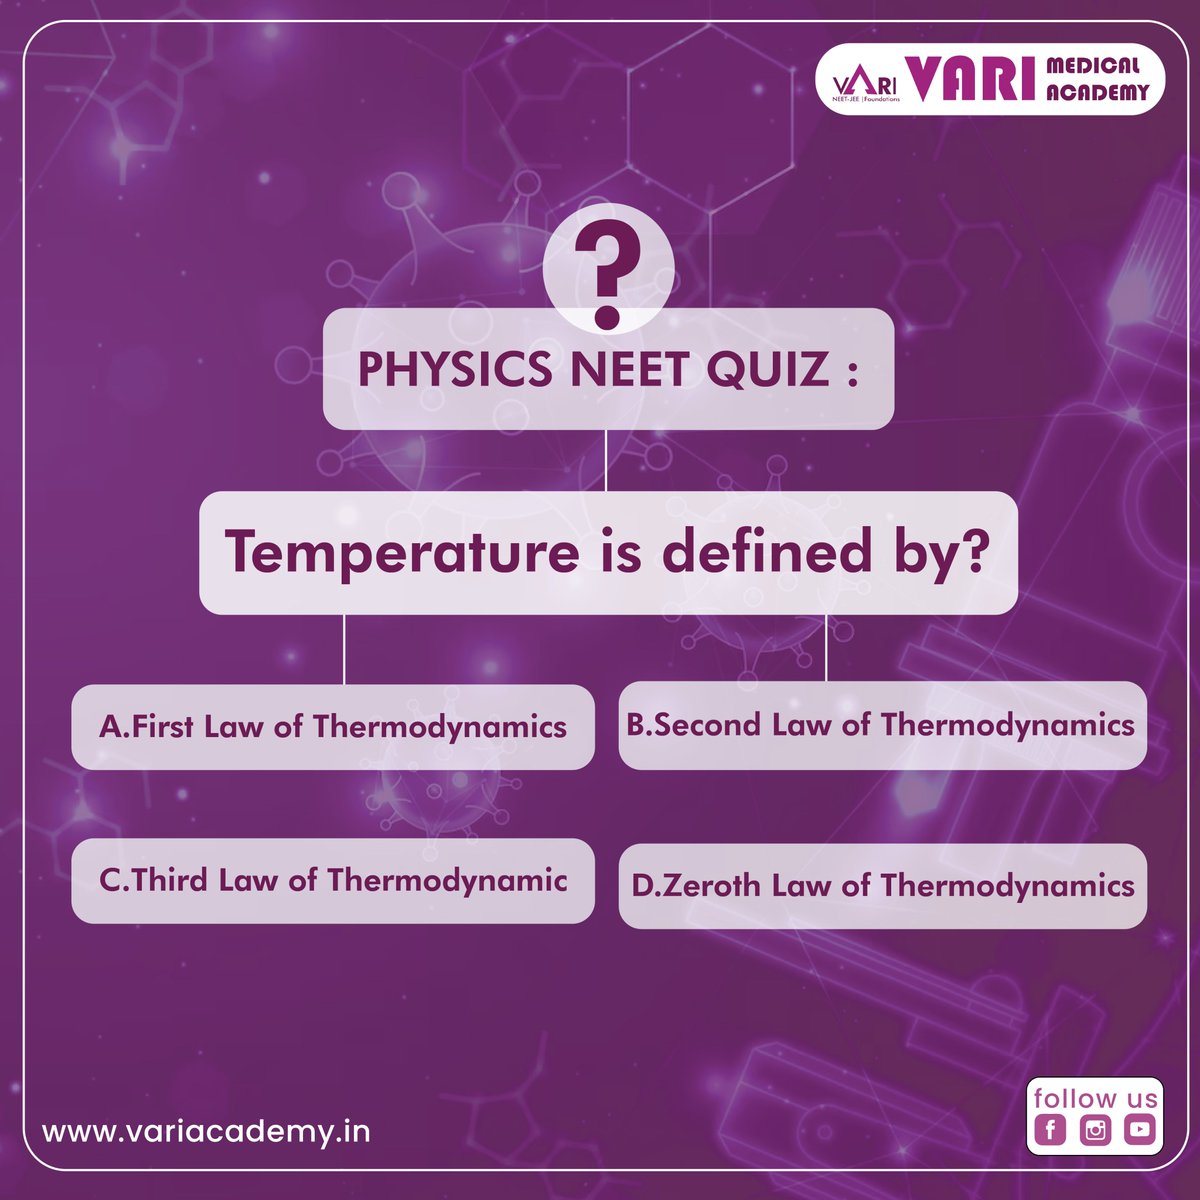 Vari's Quiz Time

NEET and JEE Aspirants !!!

Tell us the answers in Comments...

#varimedicalacademy #neet #neet2023 #neet2023preparation #jee #jee2023 #neet2023aspirants #neet2023exam #mbbs #mbbsabroad #neetphysics #neetchemistry #neetbiology #neetquestions #neetquiz #physics